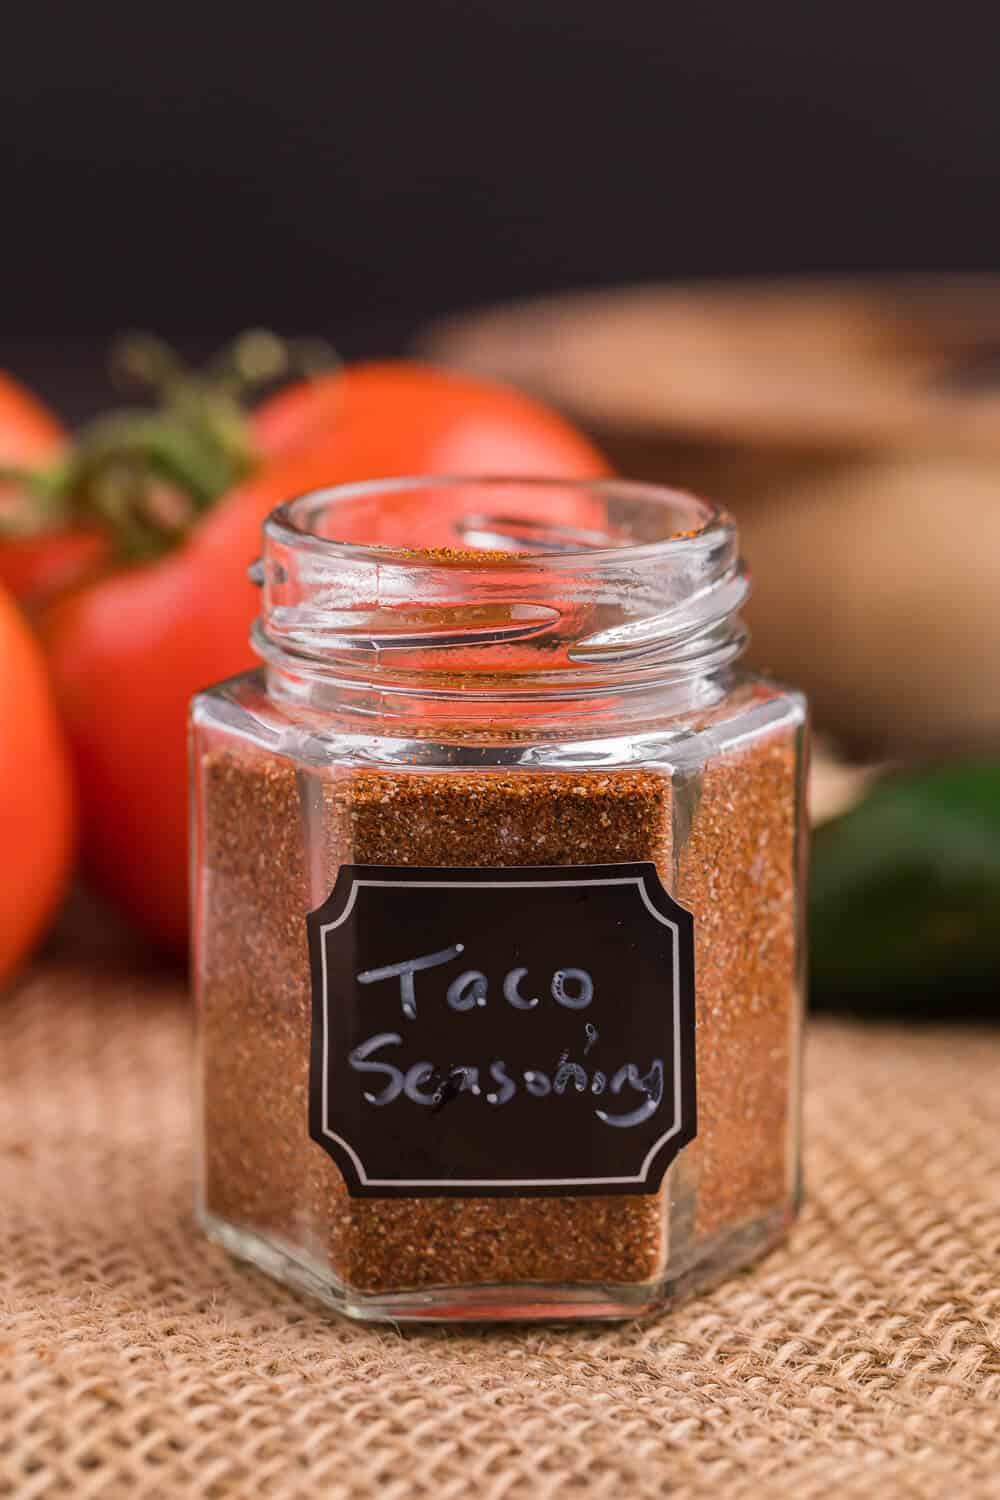 Taco seasoning in a labelled spice jar.